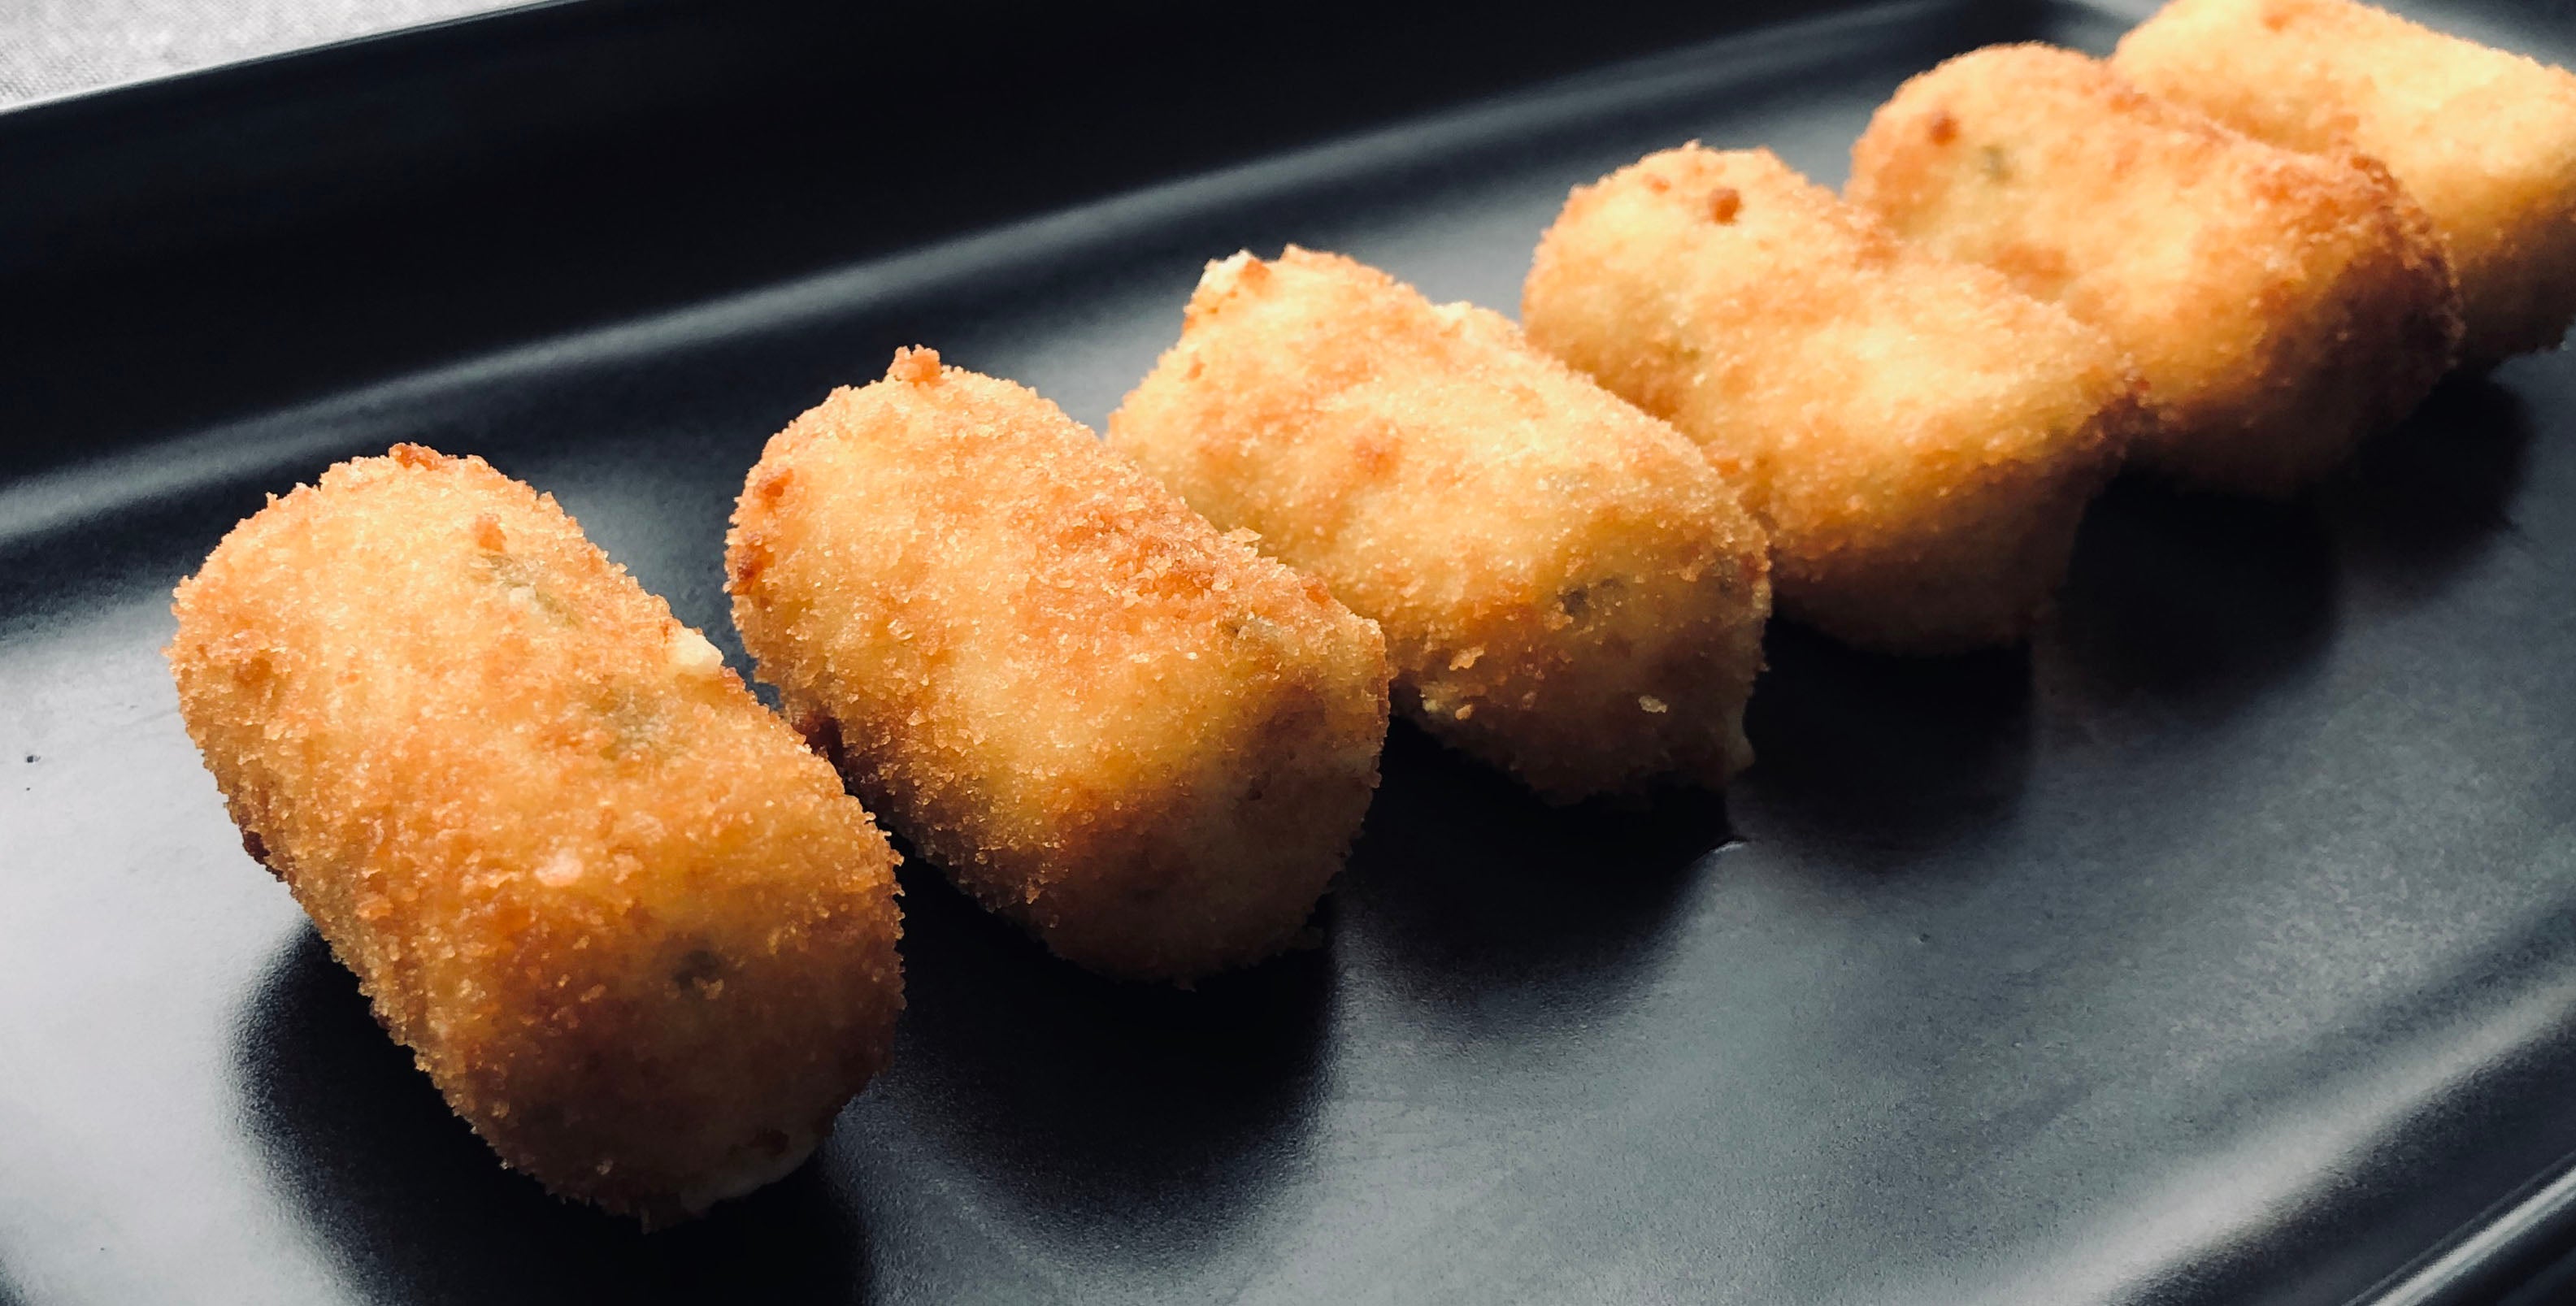 Best croquettes in Australia. Bechamel croquettes. Spanish artisan croquettes. Croquetas from La Croqueteria. Delivered frozen and easy to cook at home